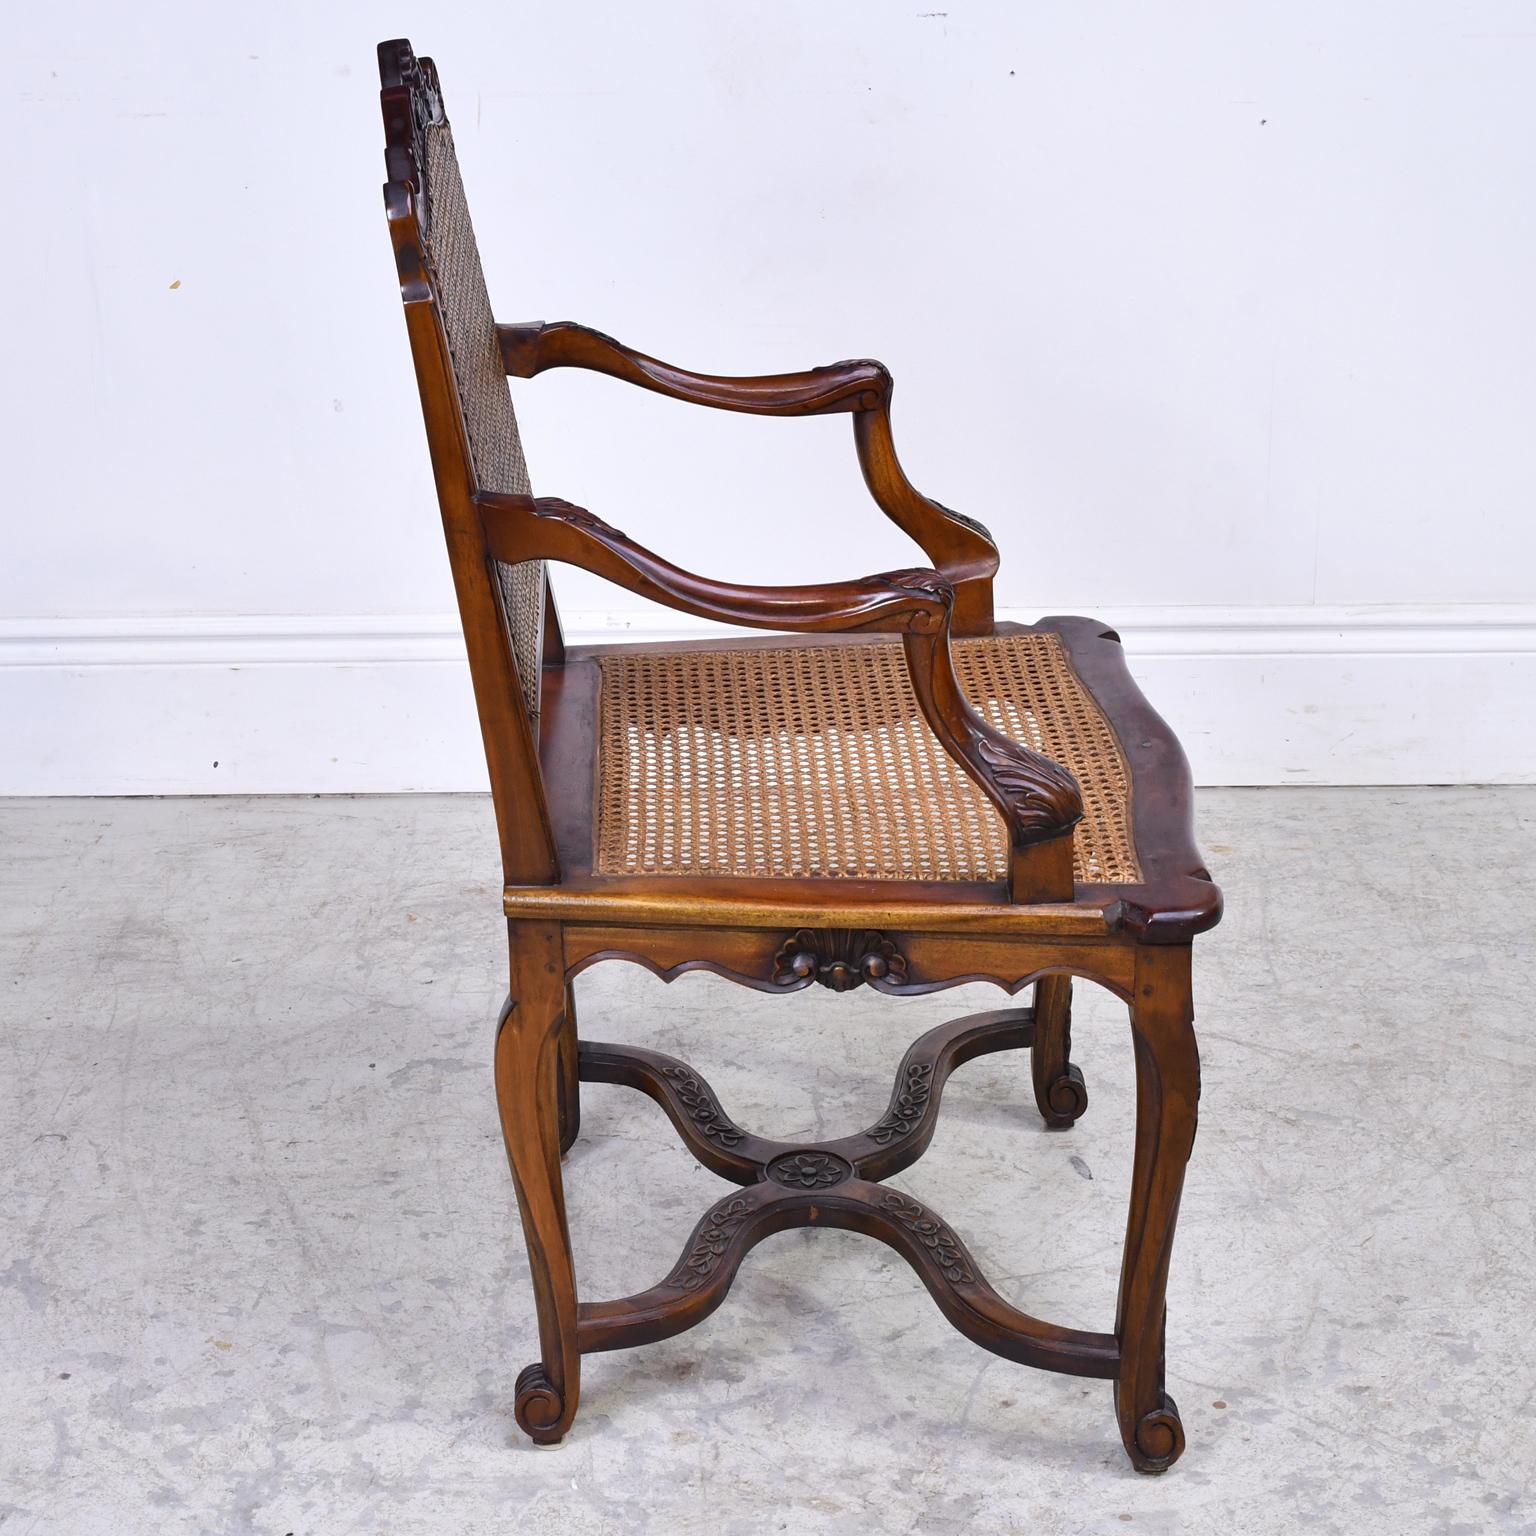 Mahogany Set of 10 LXVI Chairs with Pair of Arms and 8 Side Chairs, Caned Seat and Back